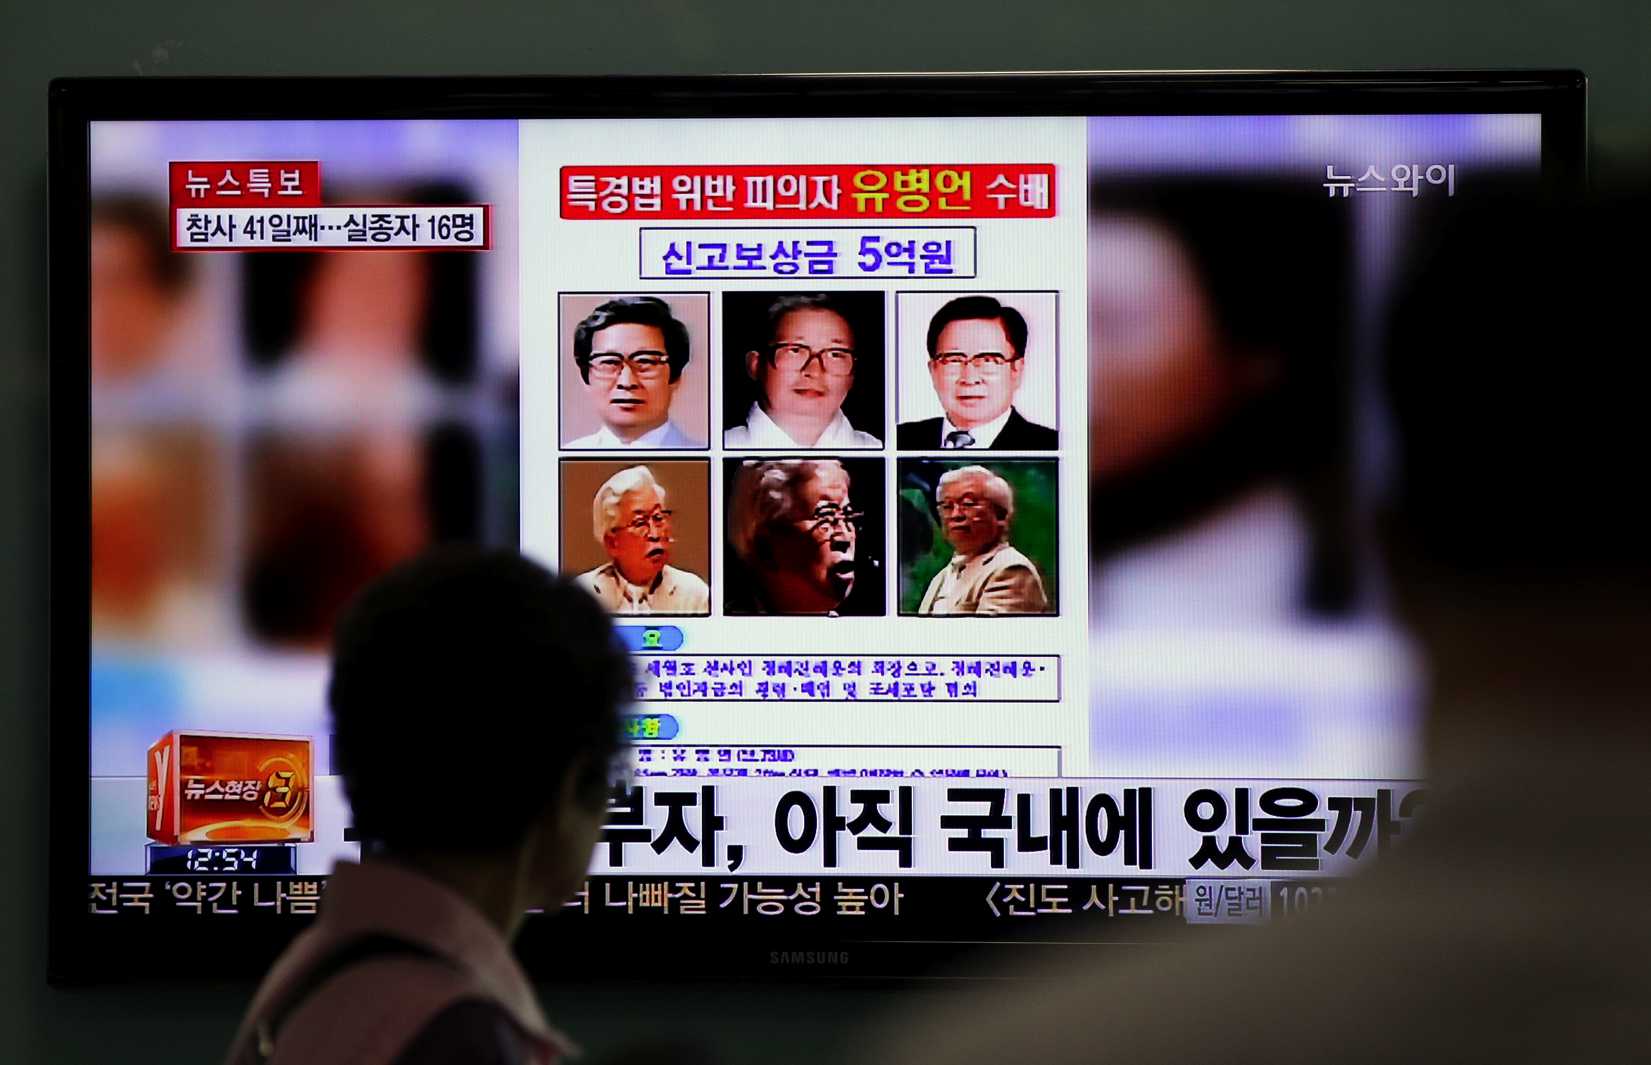 Commuters at a train station in Seoul walk past a screen displaying the wanted poster for Yoo Byung-eun and others, on Monday, May 26, 2014. (Lee Jin-man—AP)